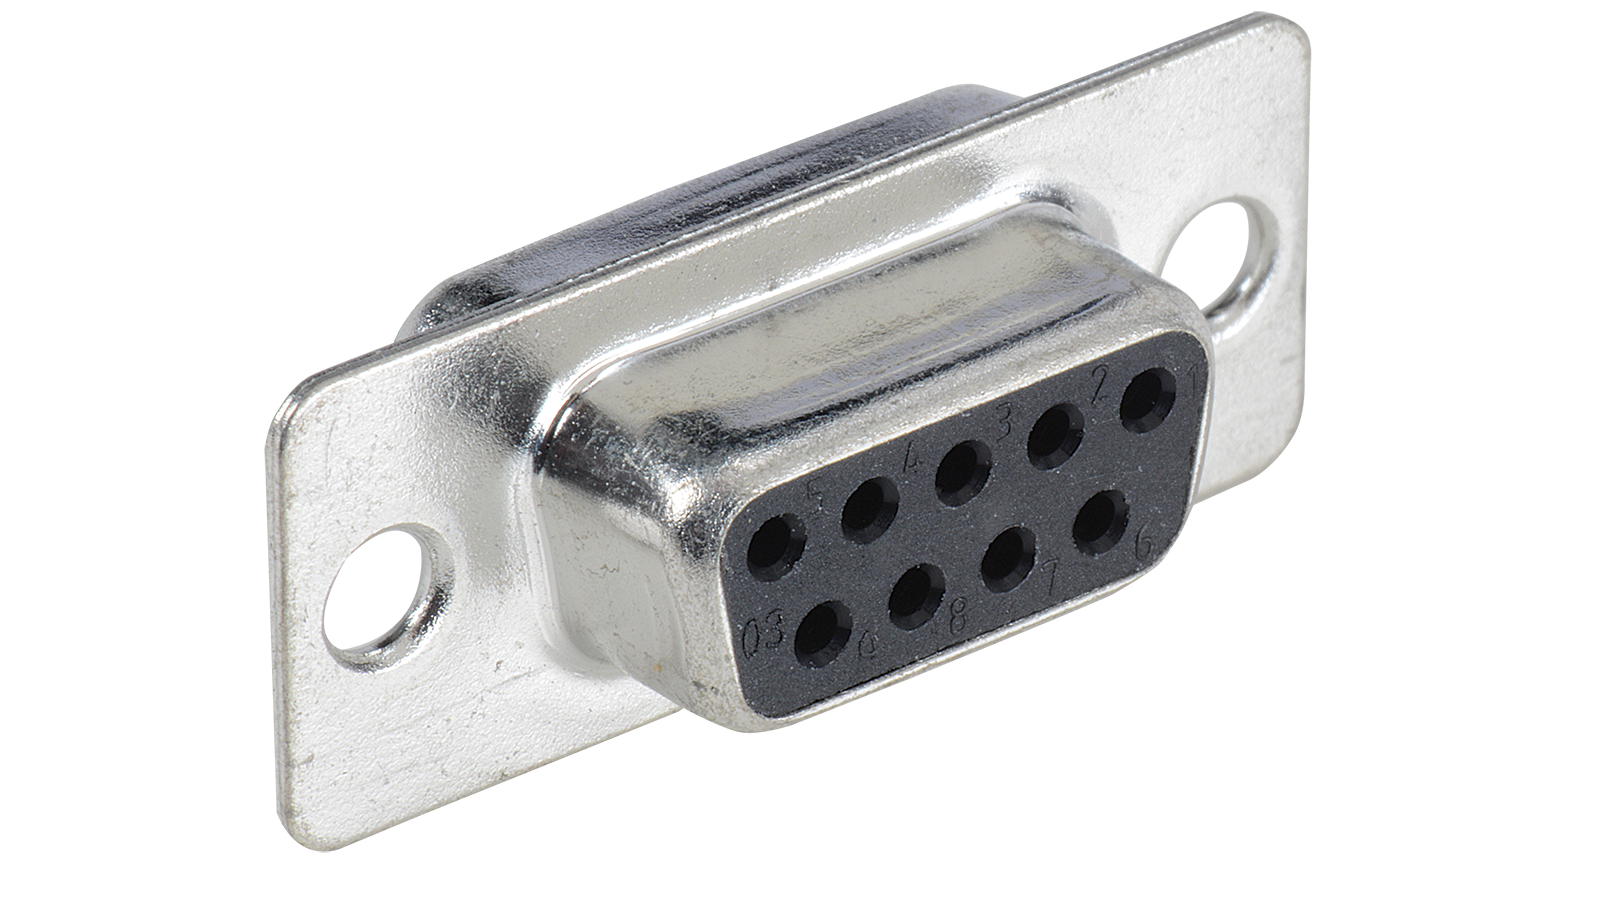 Connector PNG Image File